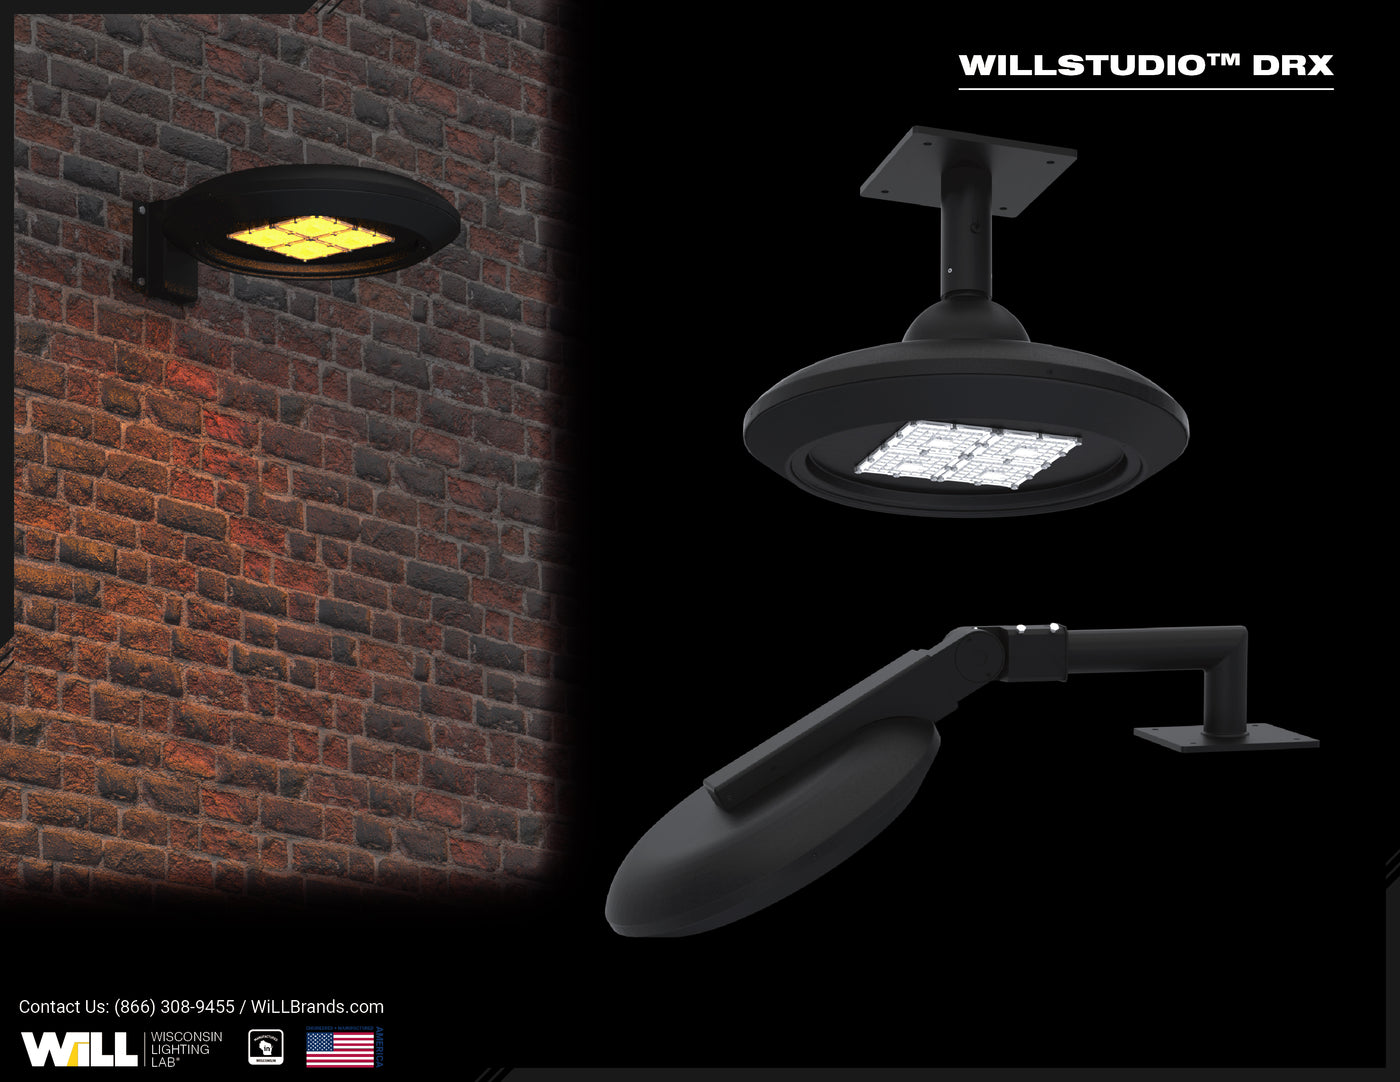 WILLSTUDIO DRX Wall, Ceiling & Sign Mount